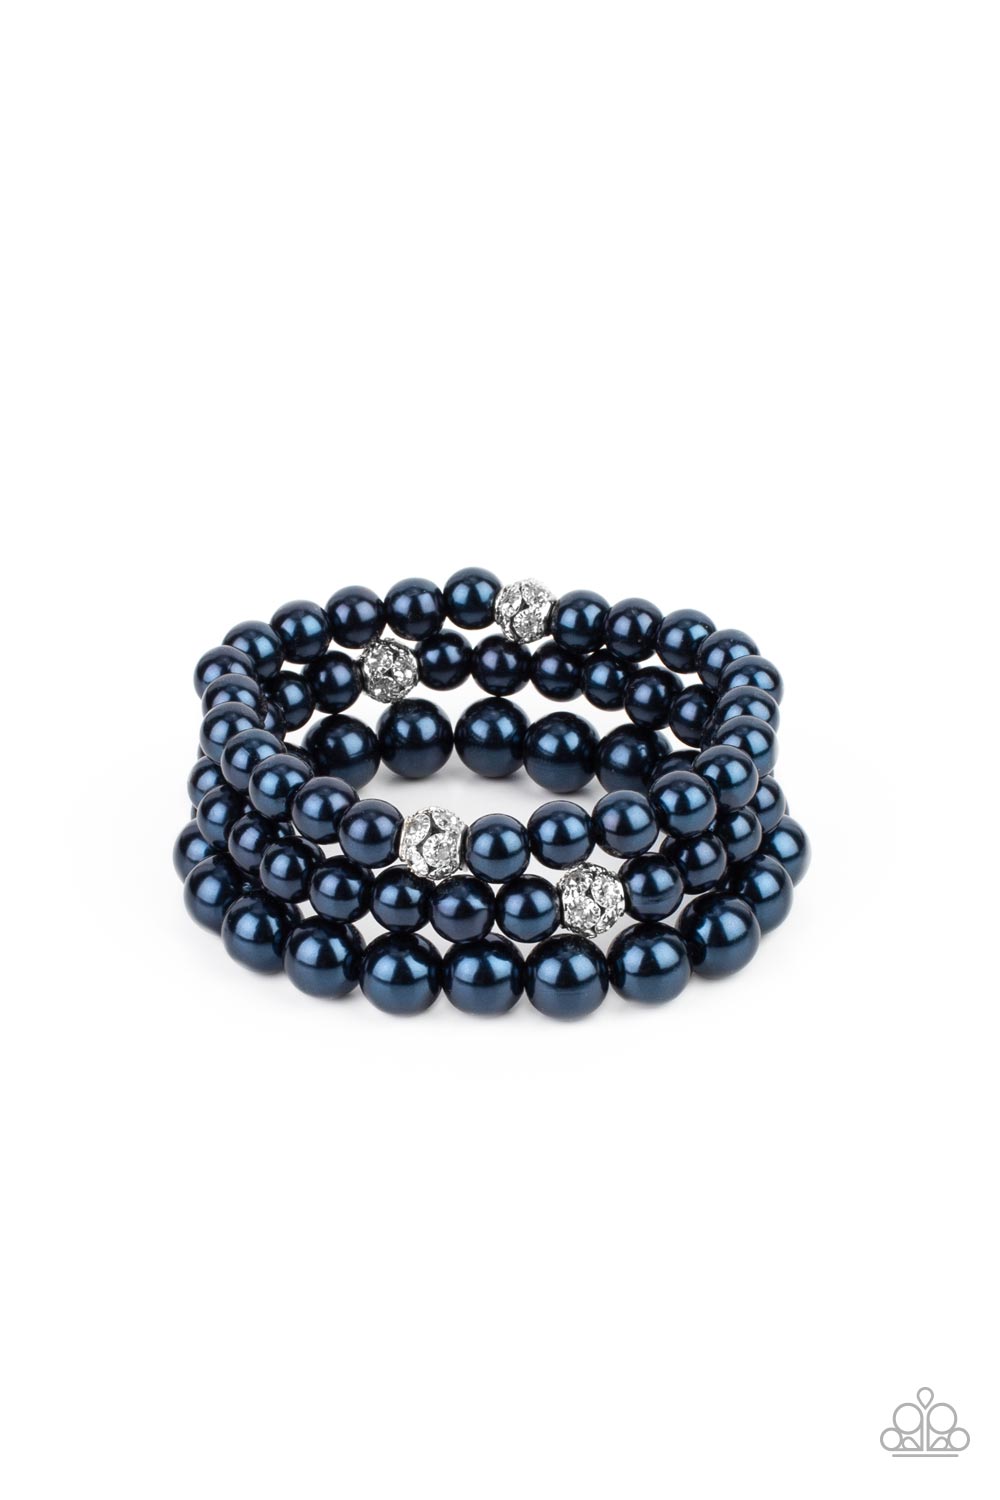 Paparazzi - Here Comes The Heiress - Blue Bracelet